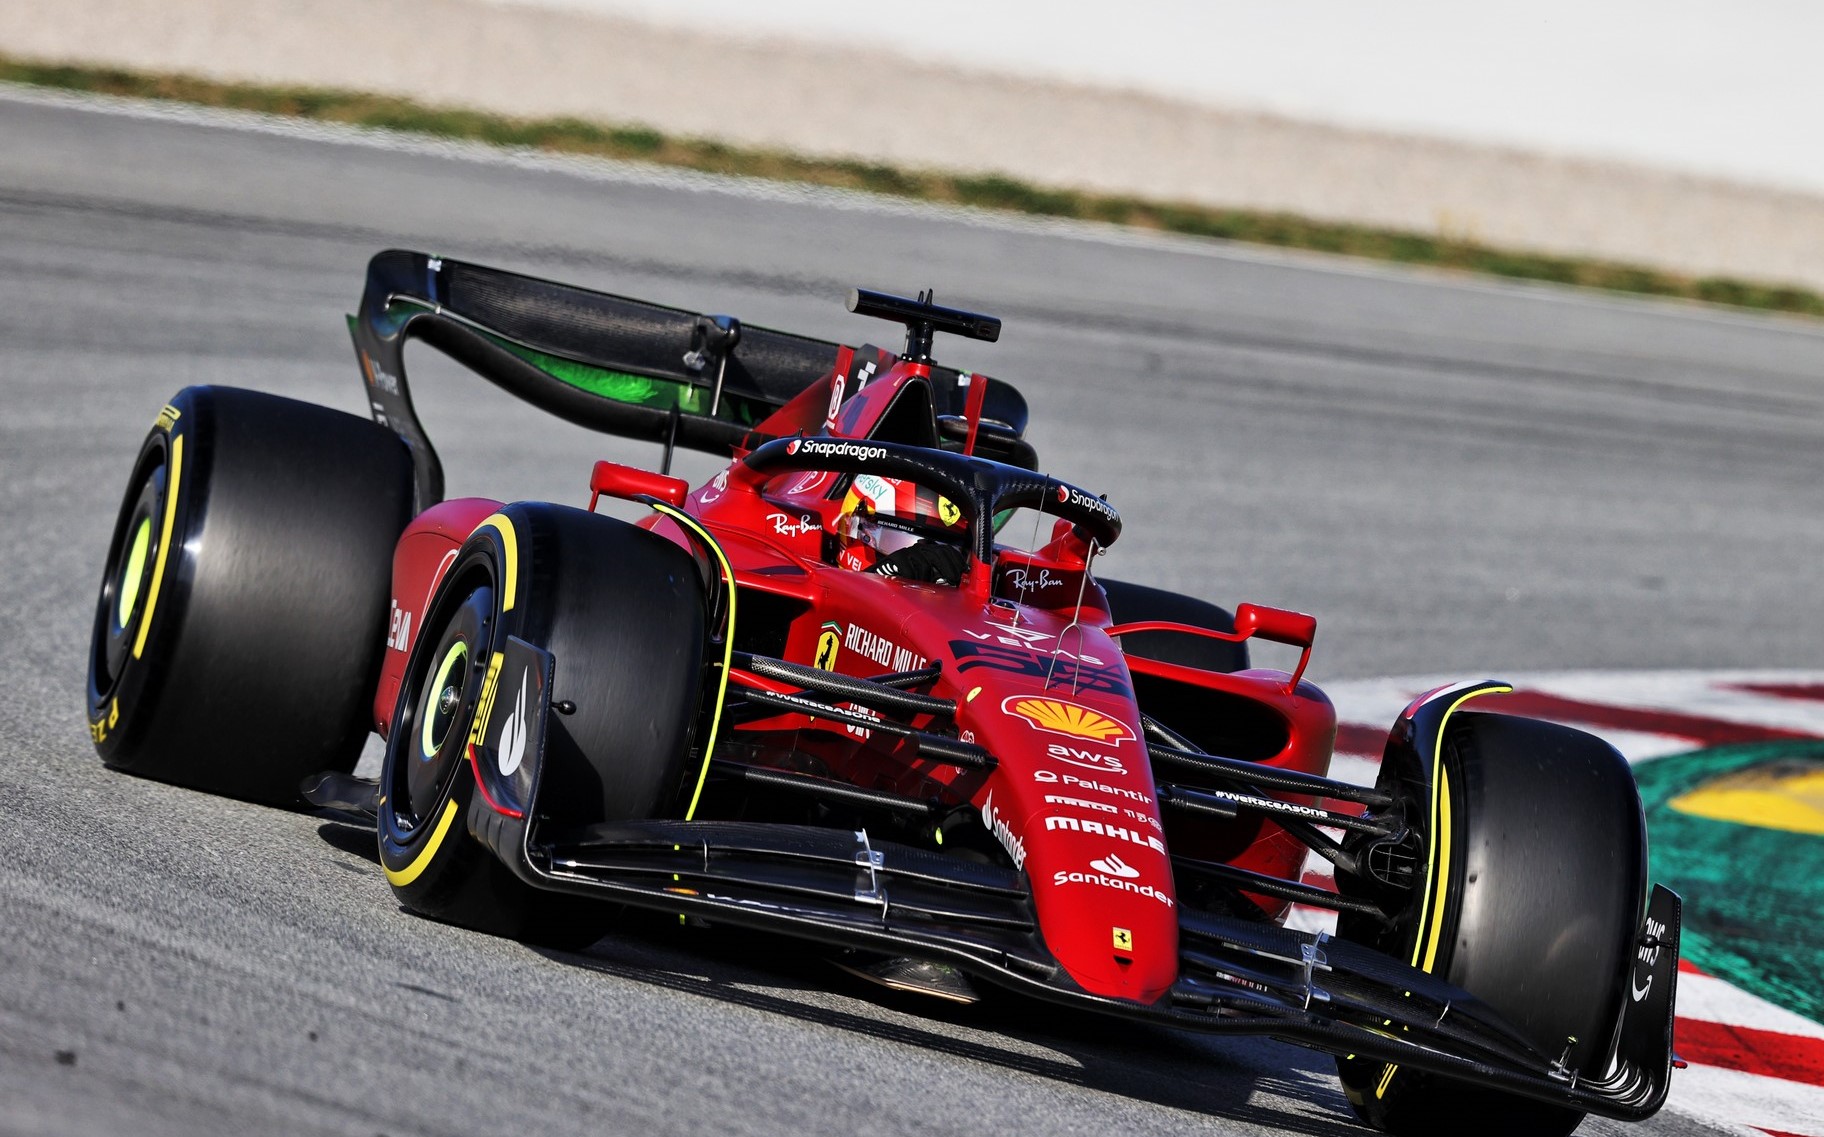 Ferrari gets Sainz a new chassis after fuel issue